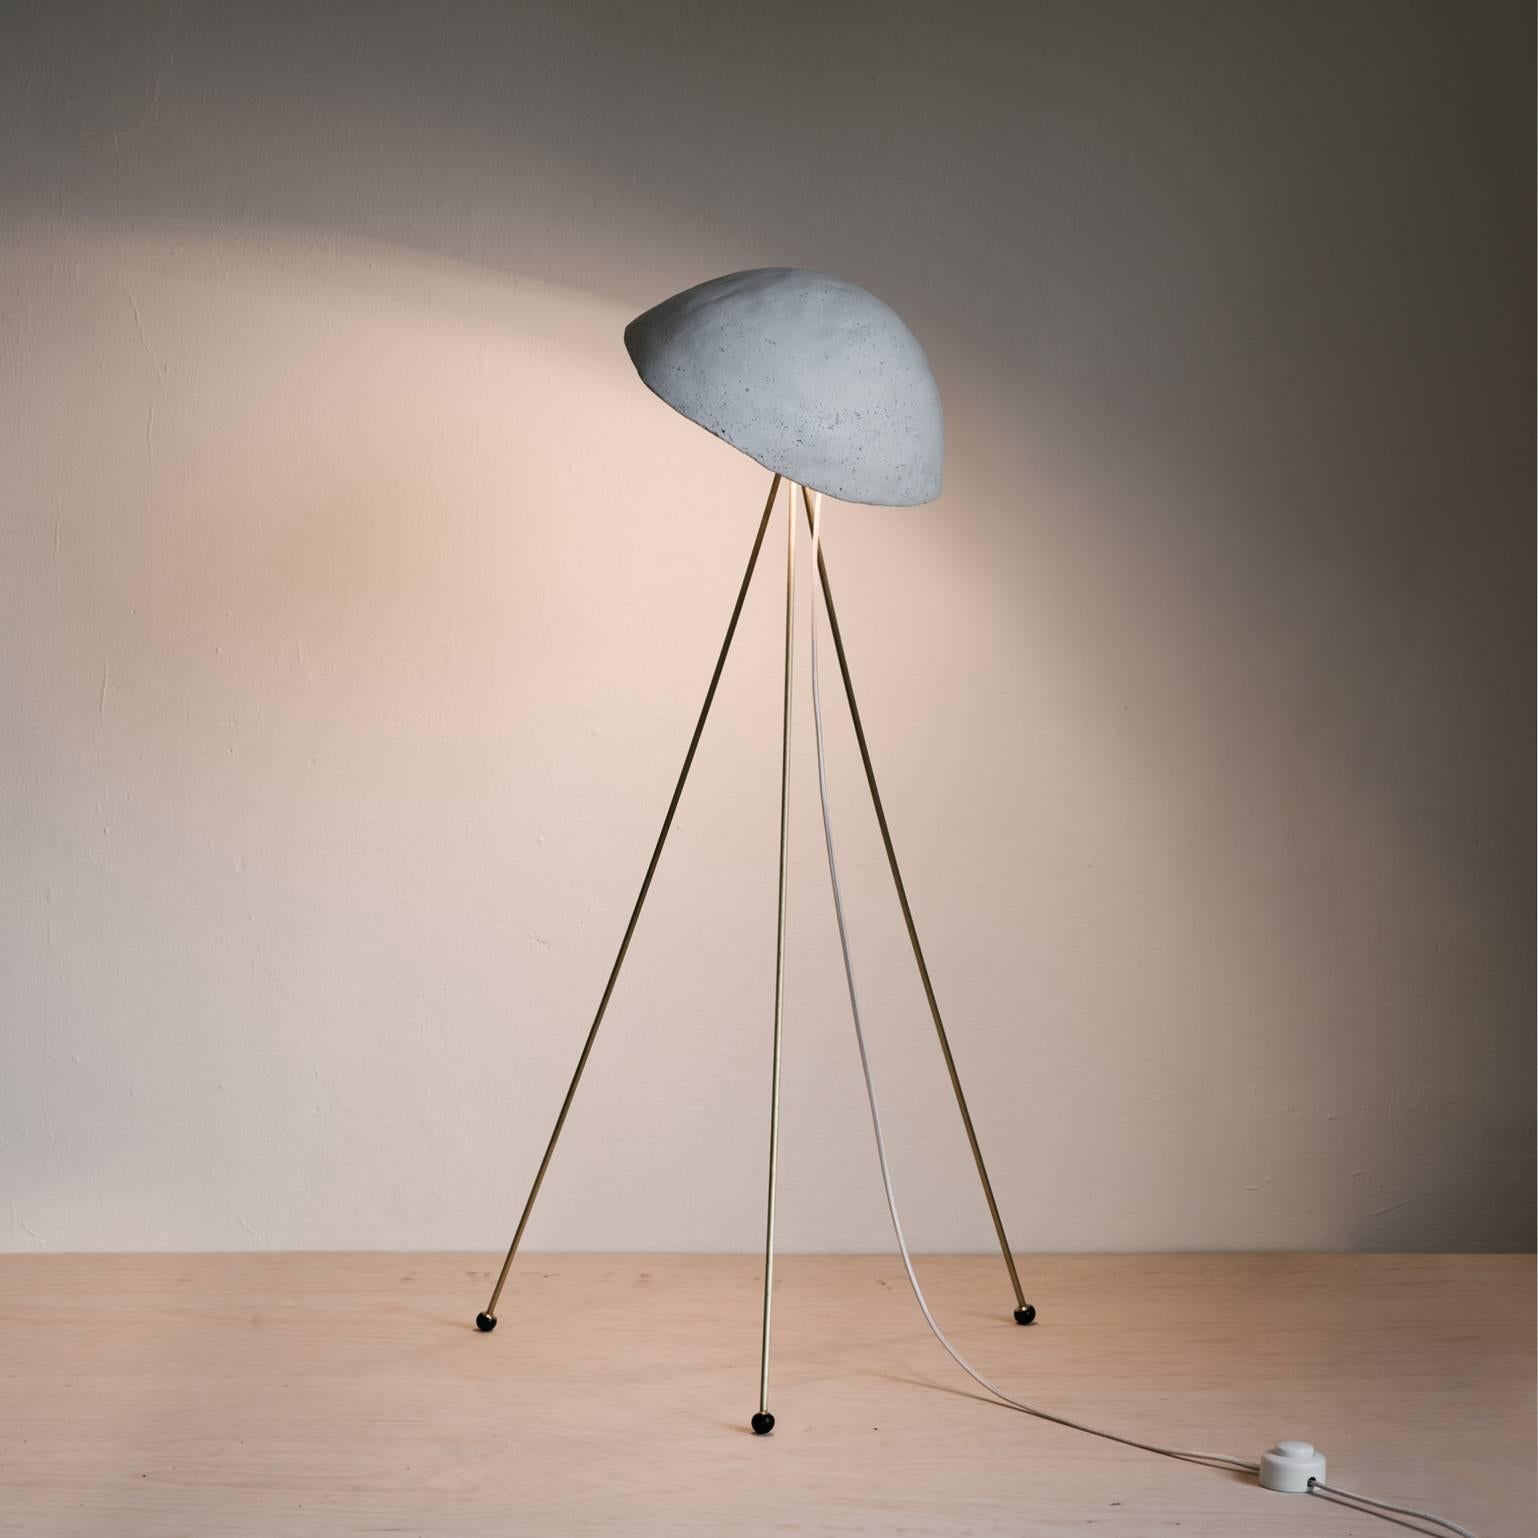 The Funny Buddy Floor Lamp has a hand-cast, irregularly domed gypsum 